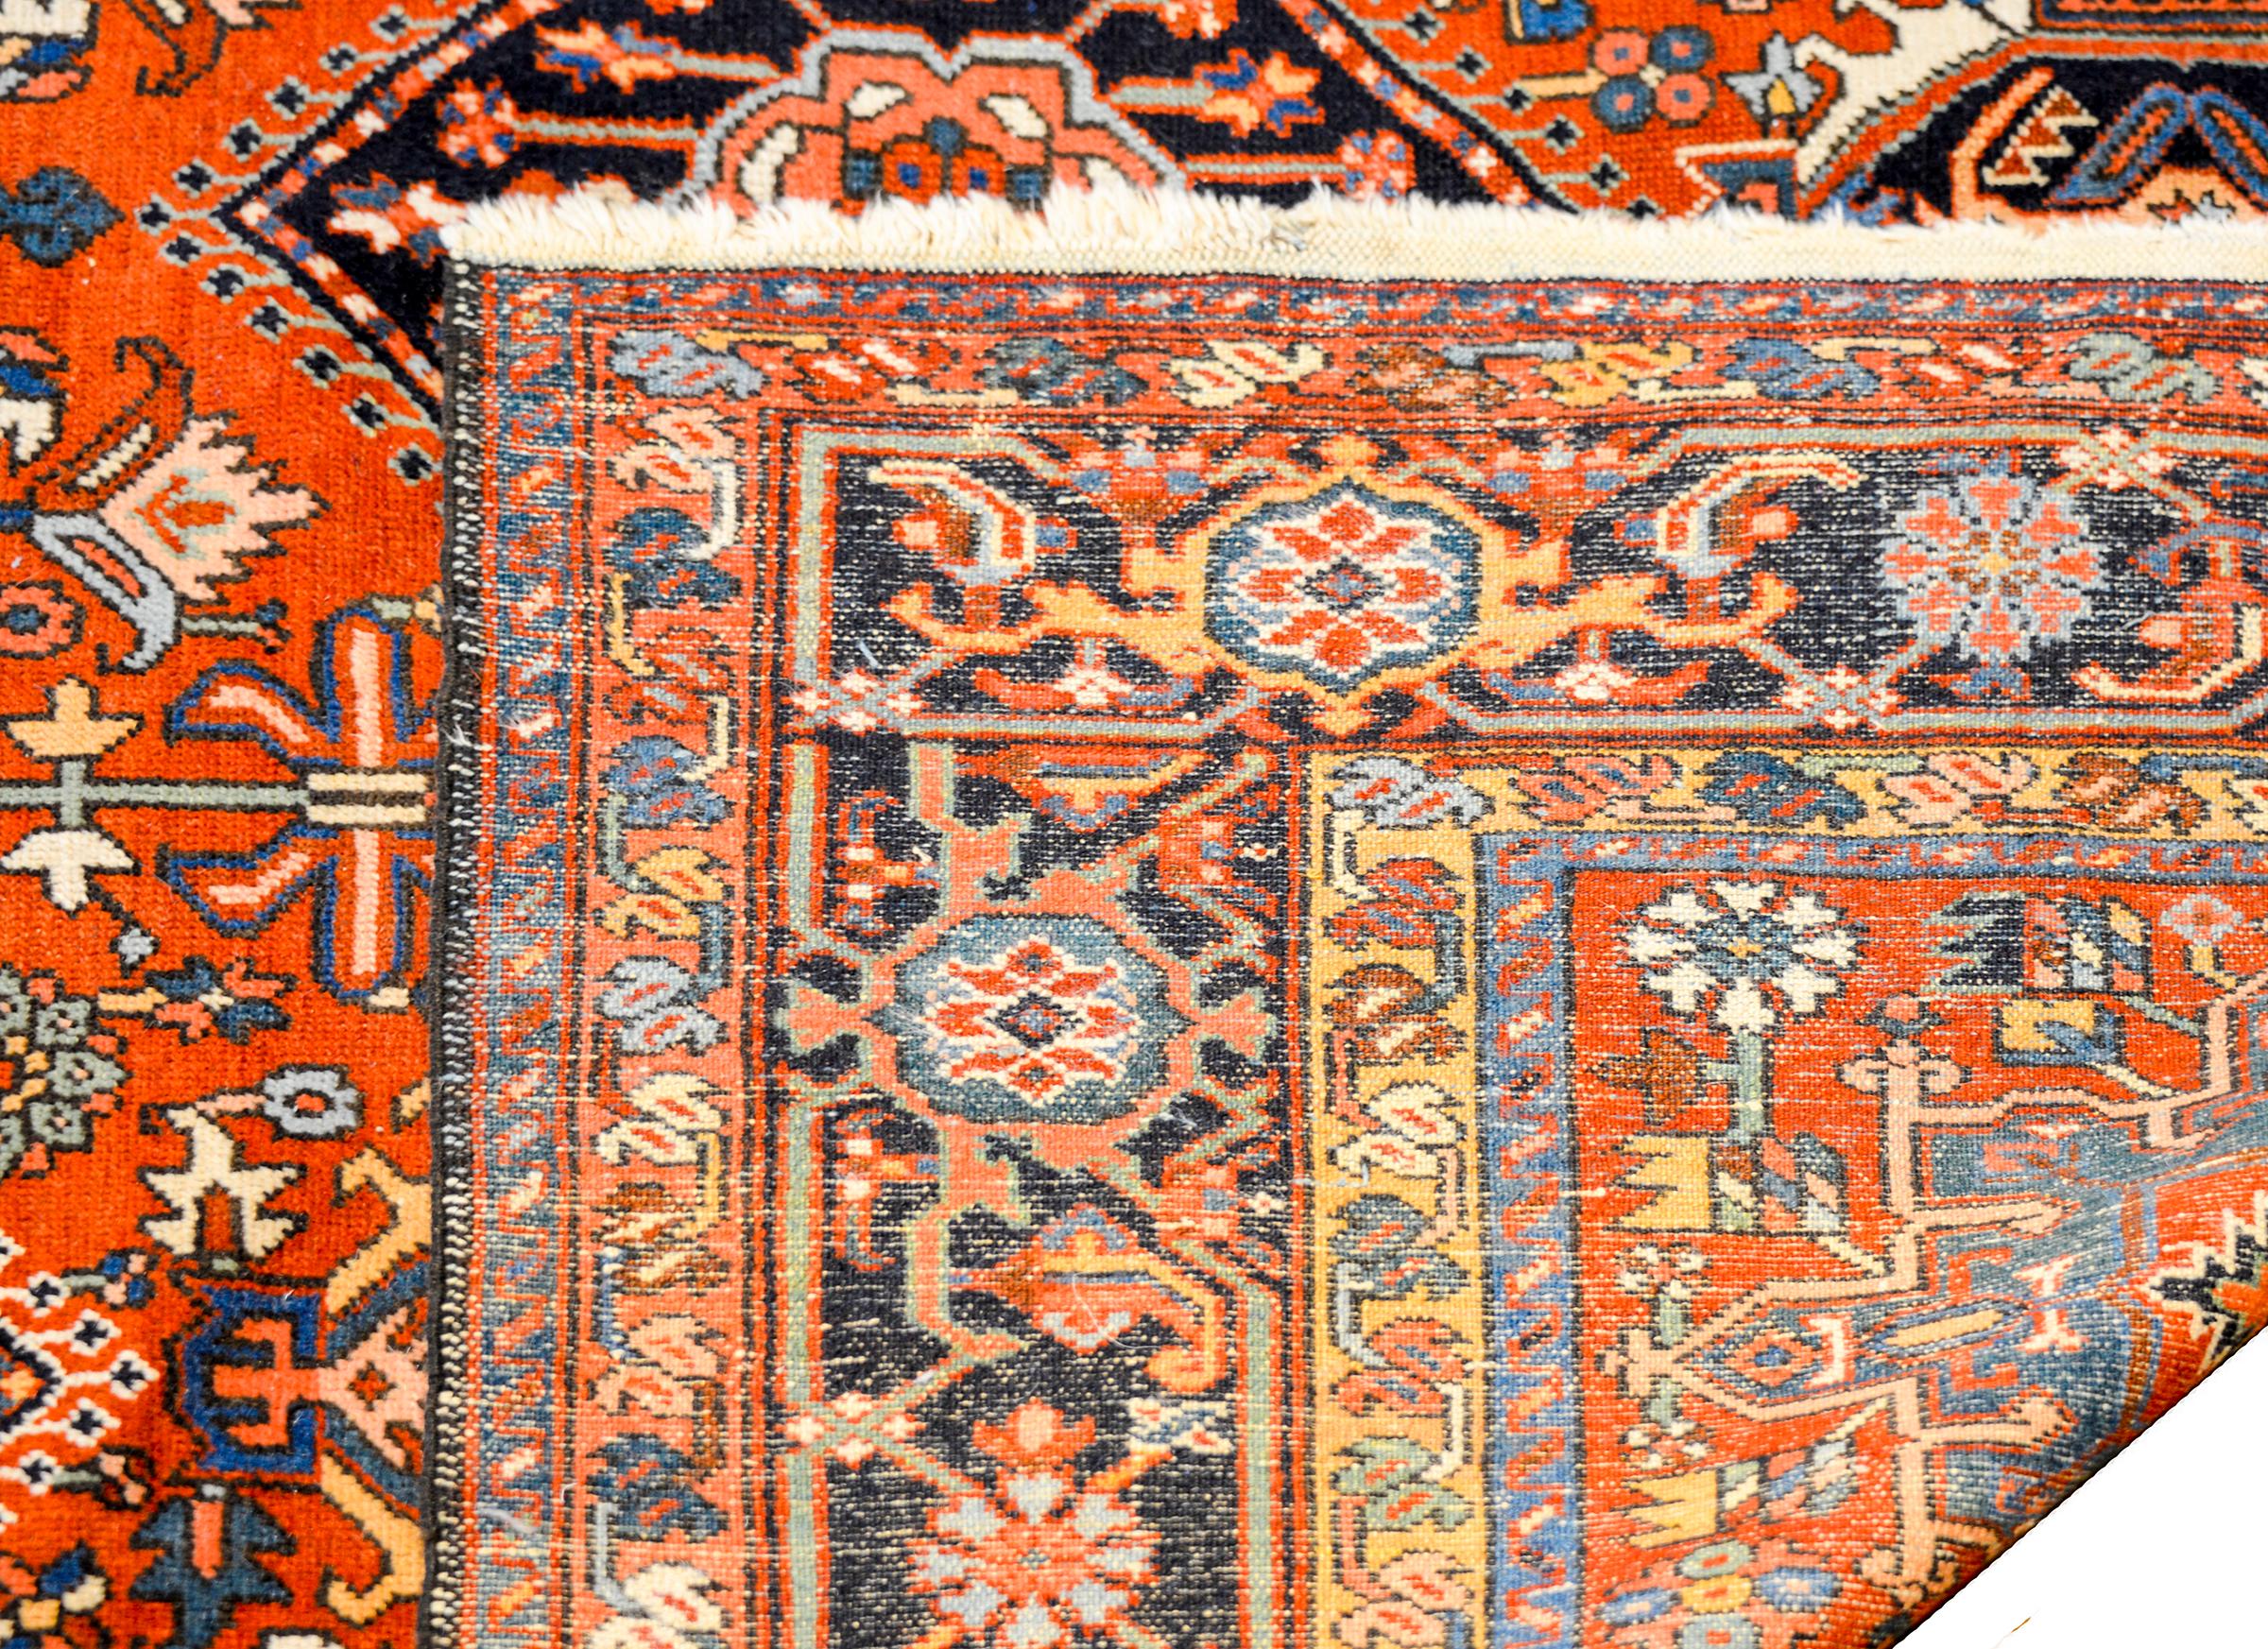 An unusual early 20th century Persian Heriz rug with twenty-one stylized floral medallions woven in light and dark indigo, gold, crimson, and white vegetable dyed wool, on a gorgeous bold crimson background. The border is wide, with a large central